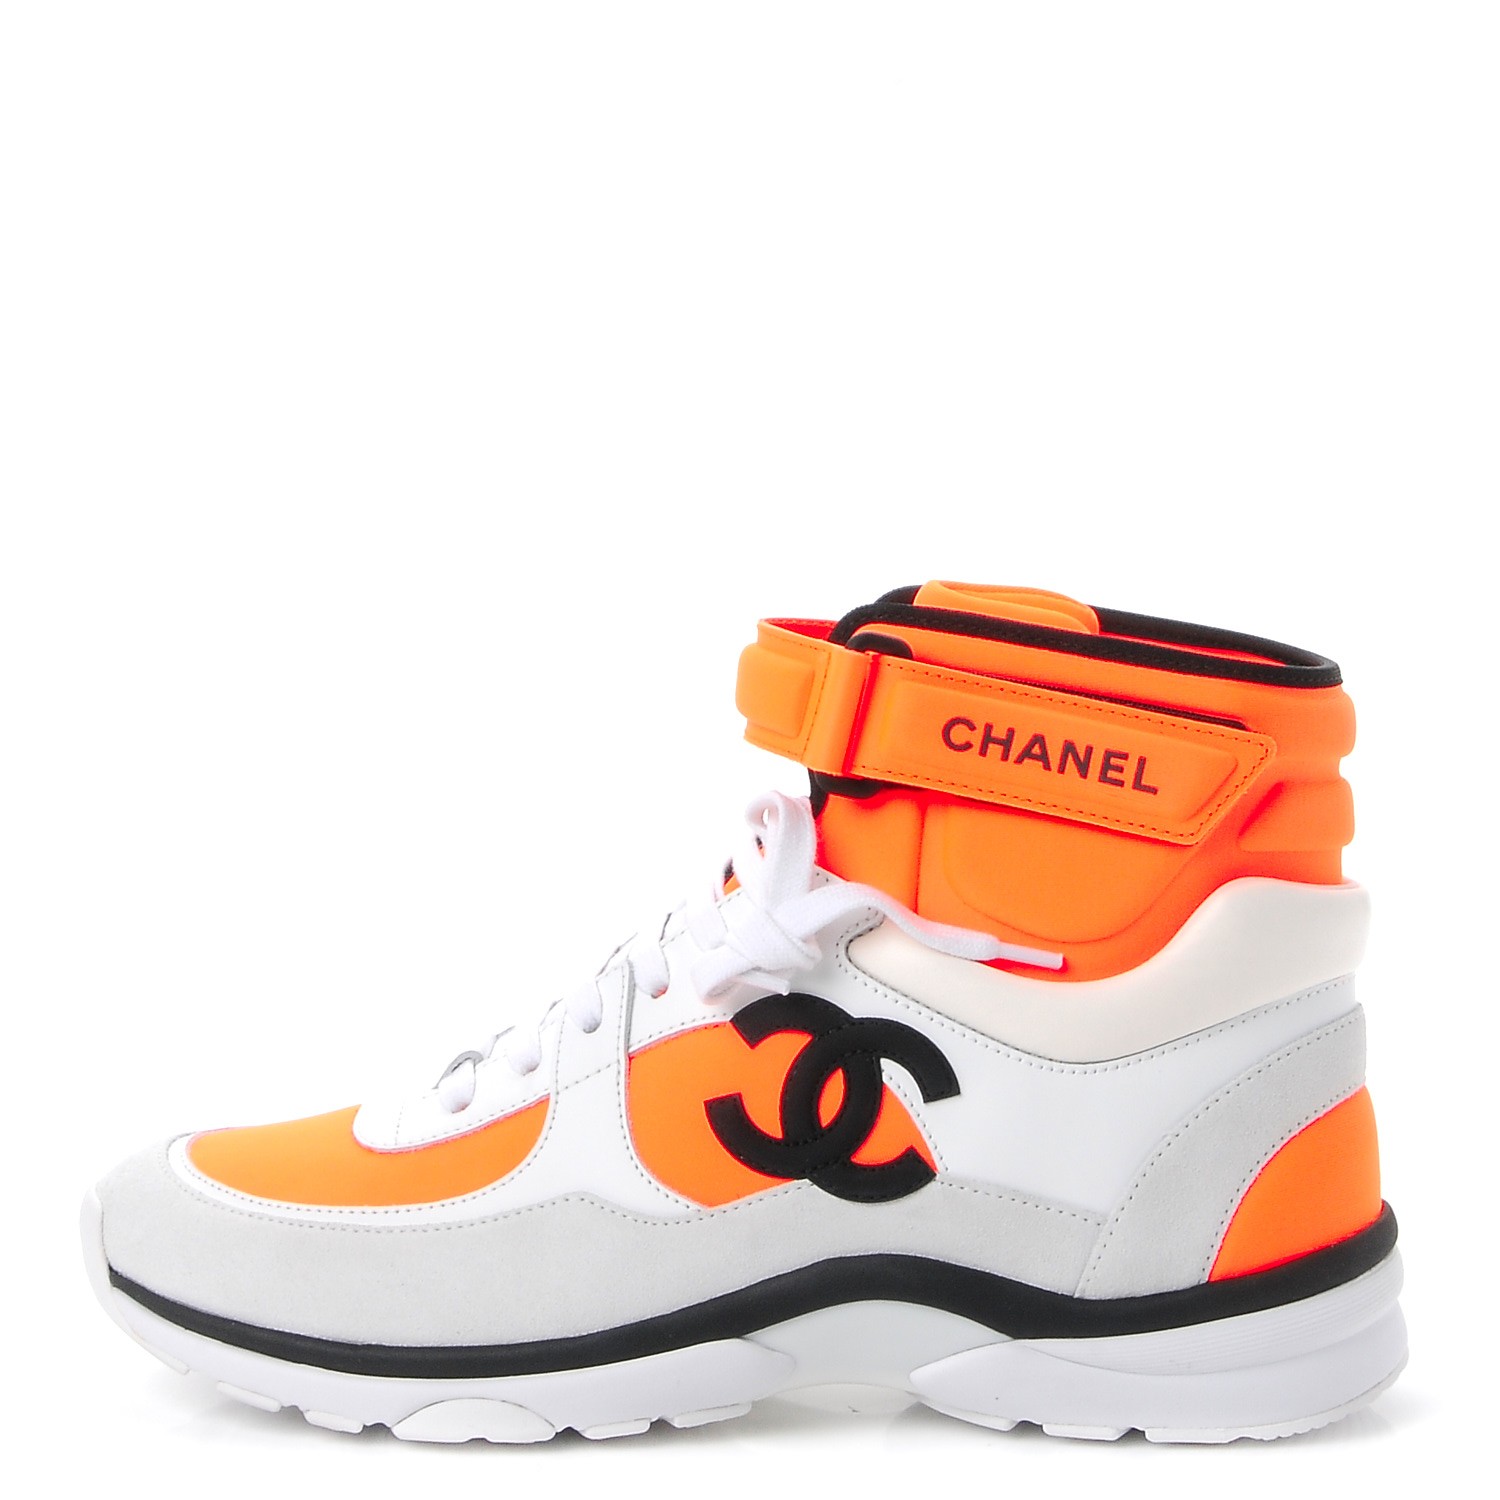 orange and black chanel sneakers